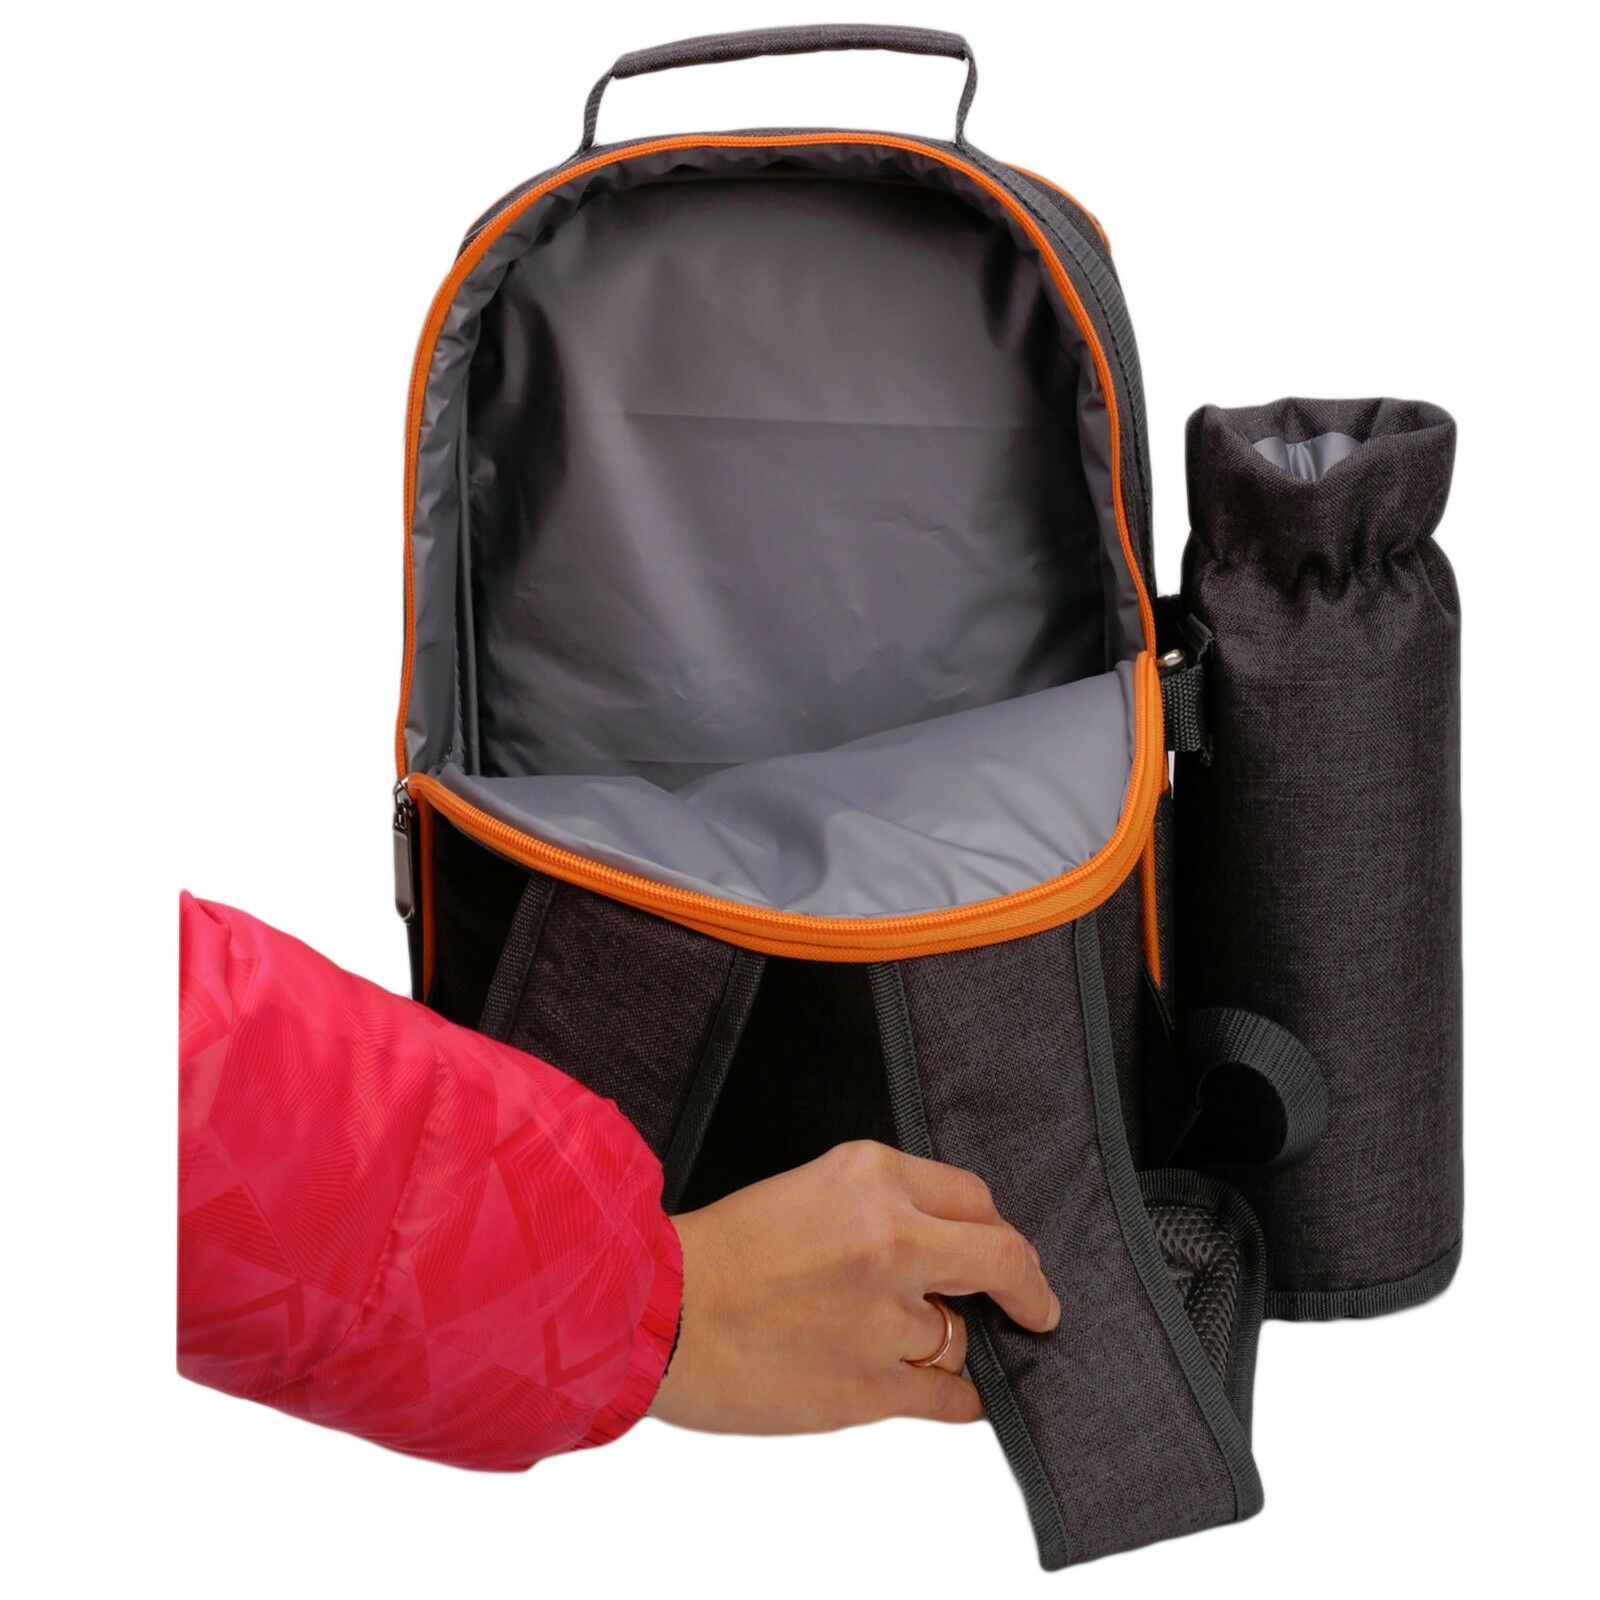 2 Person Picnic Cooler Bag With Accessories, EAN: 0706502829759 GEEZY - The Magic Toy Shop